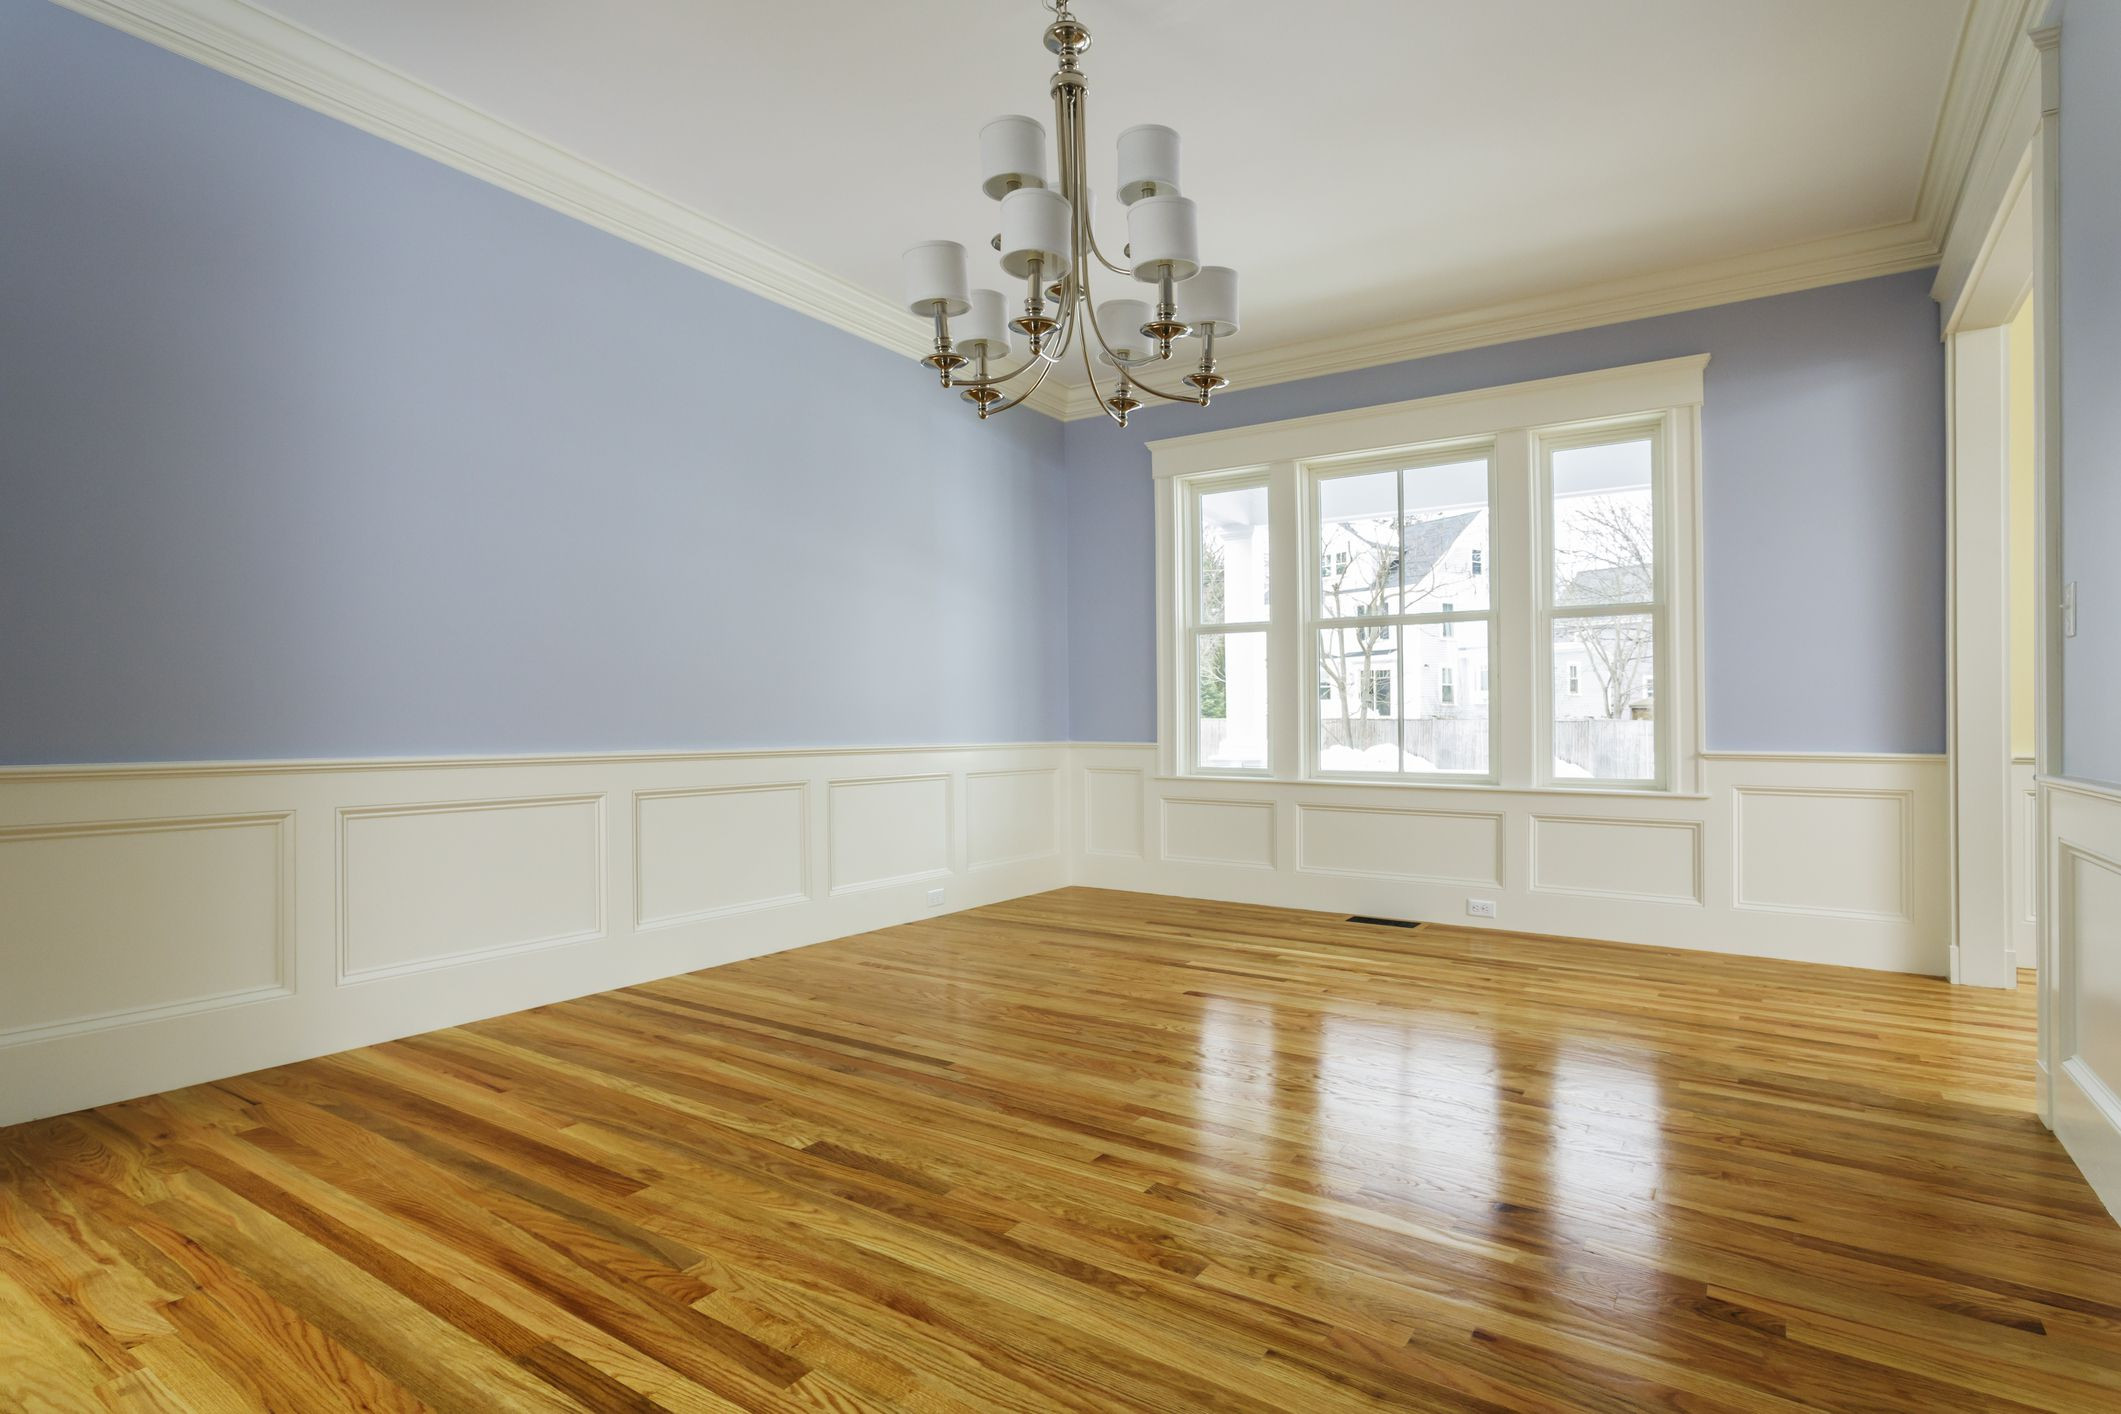 16 Lovely Home Depot Hardwood Floor Sealer 2024 free download home depot hardwood floor sealer of how to polyurethane wood floors home depot eastern white pine tongue with regard to how to polyurethane wood floors hardwood flooring finish stain decorat